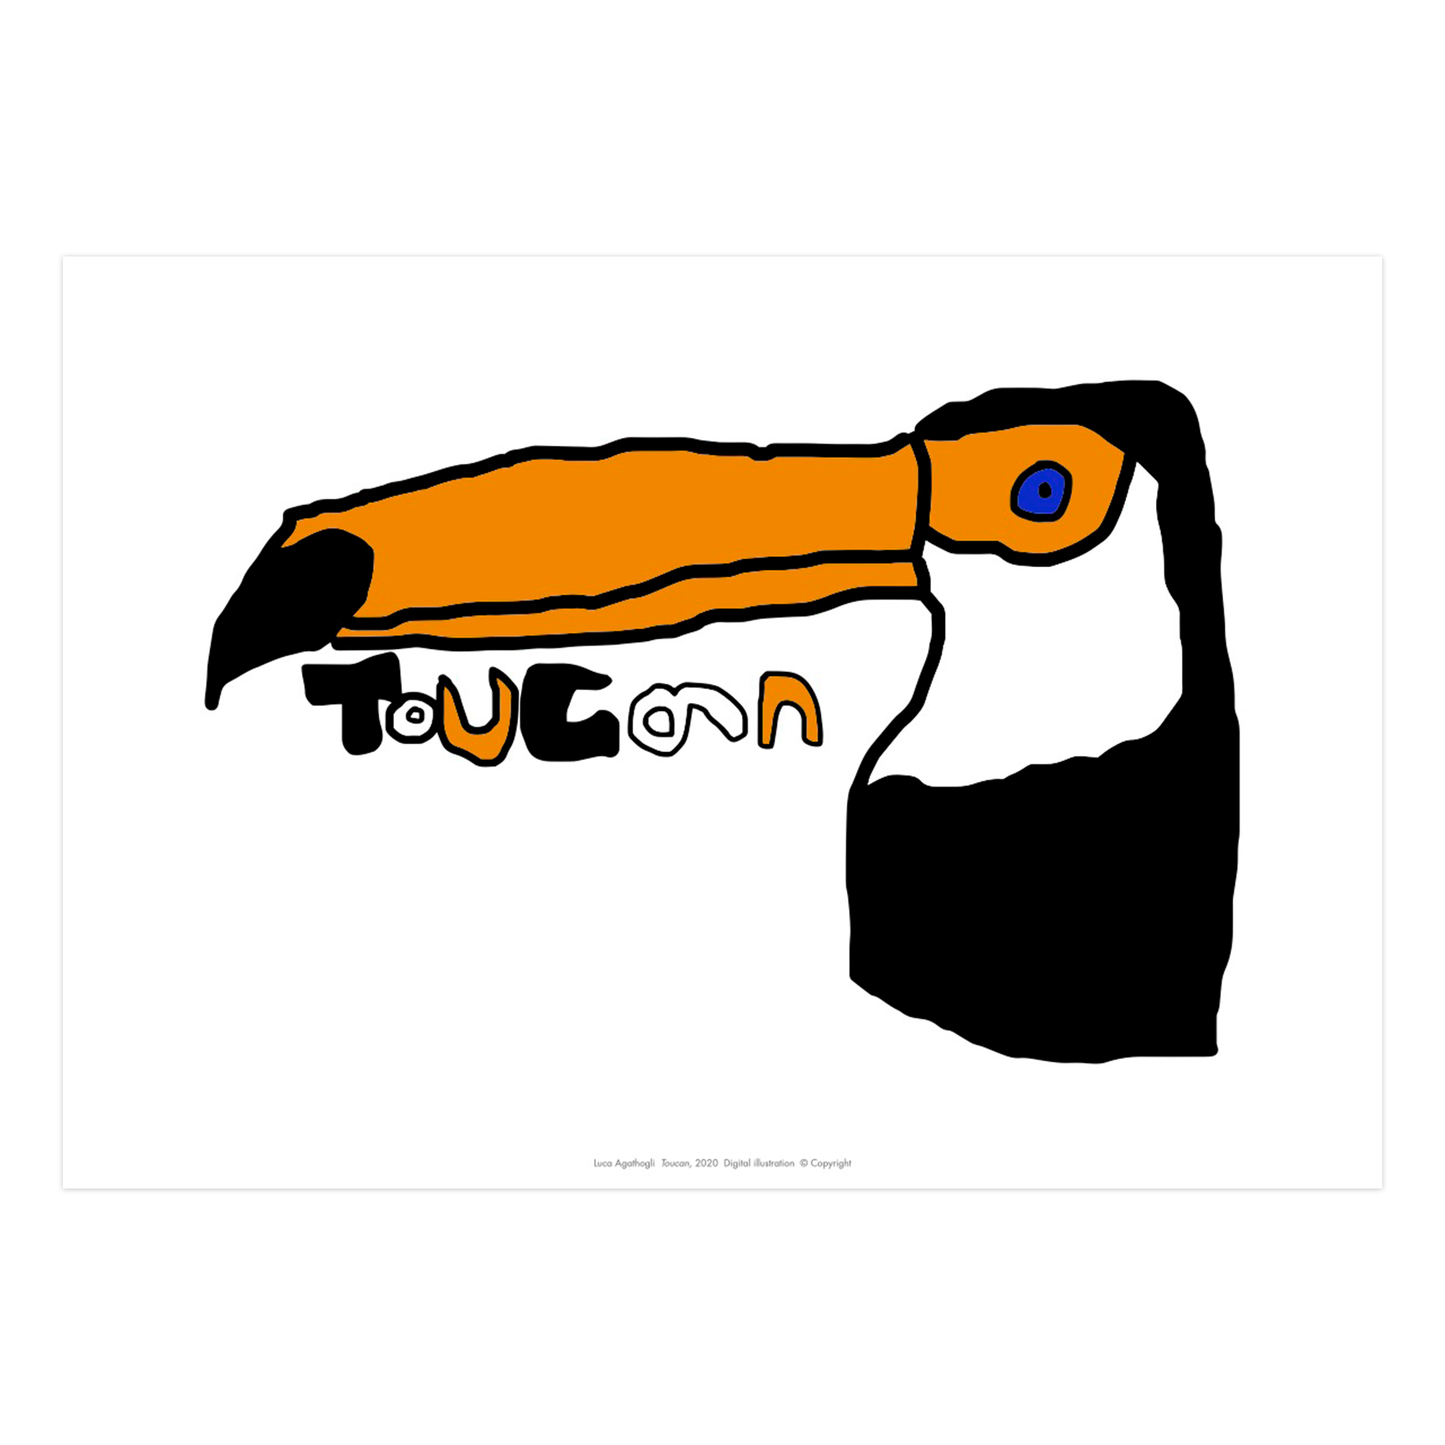 Drawing of a toucan